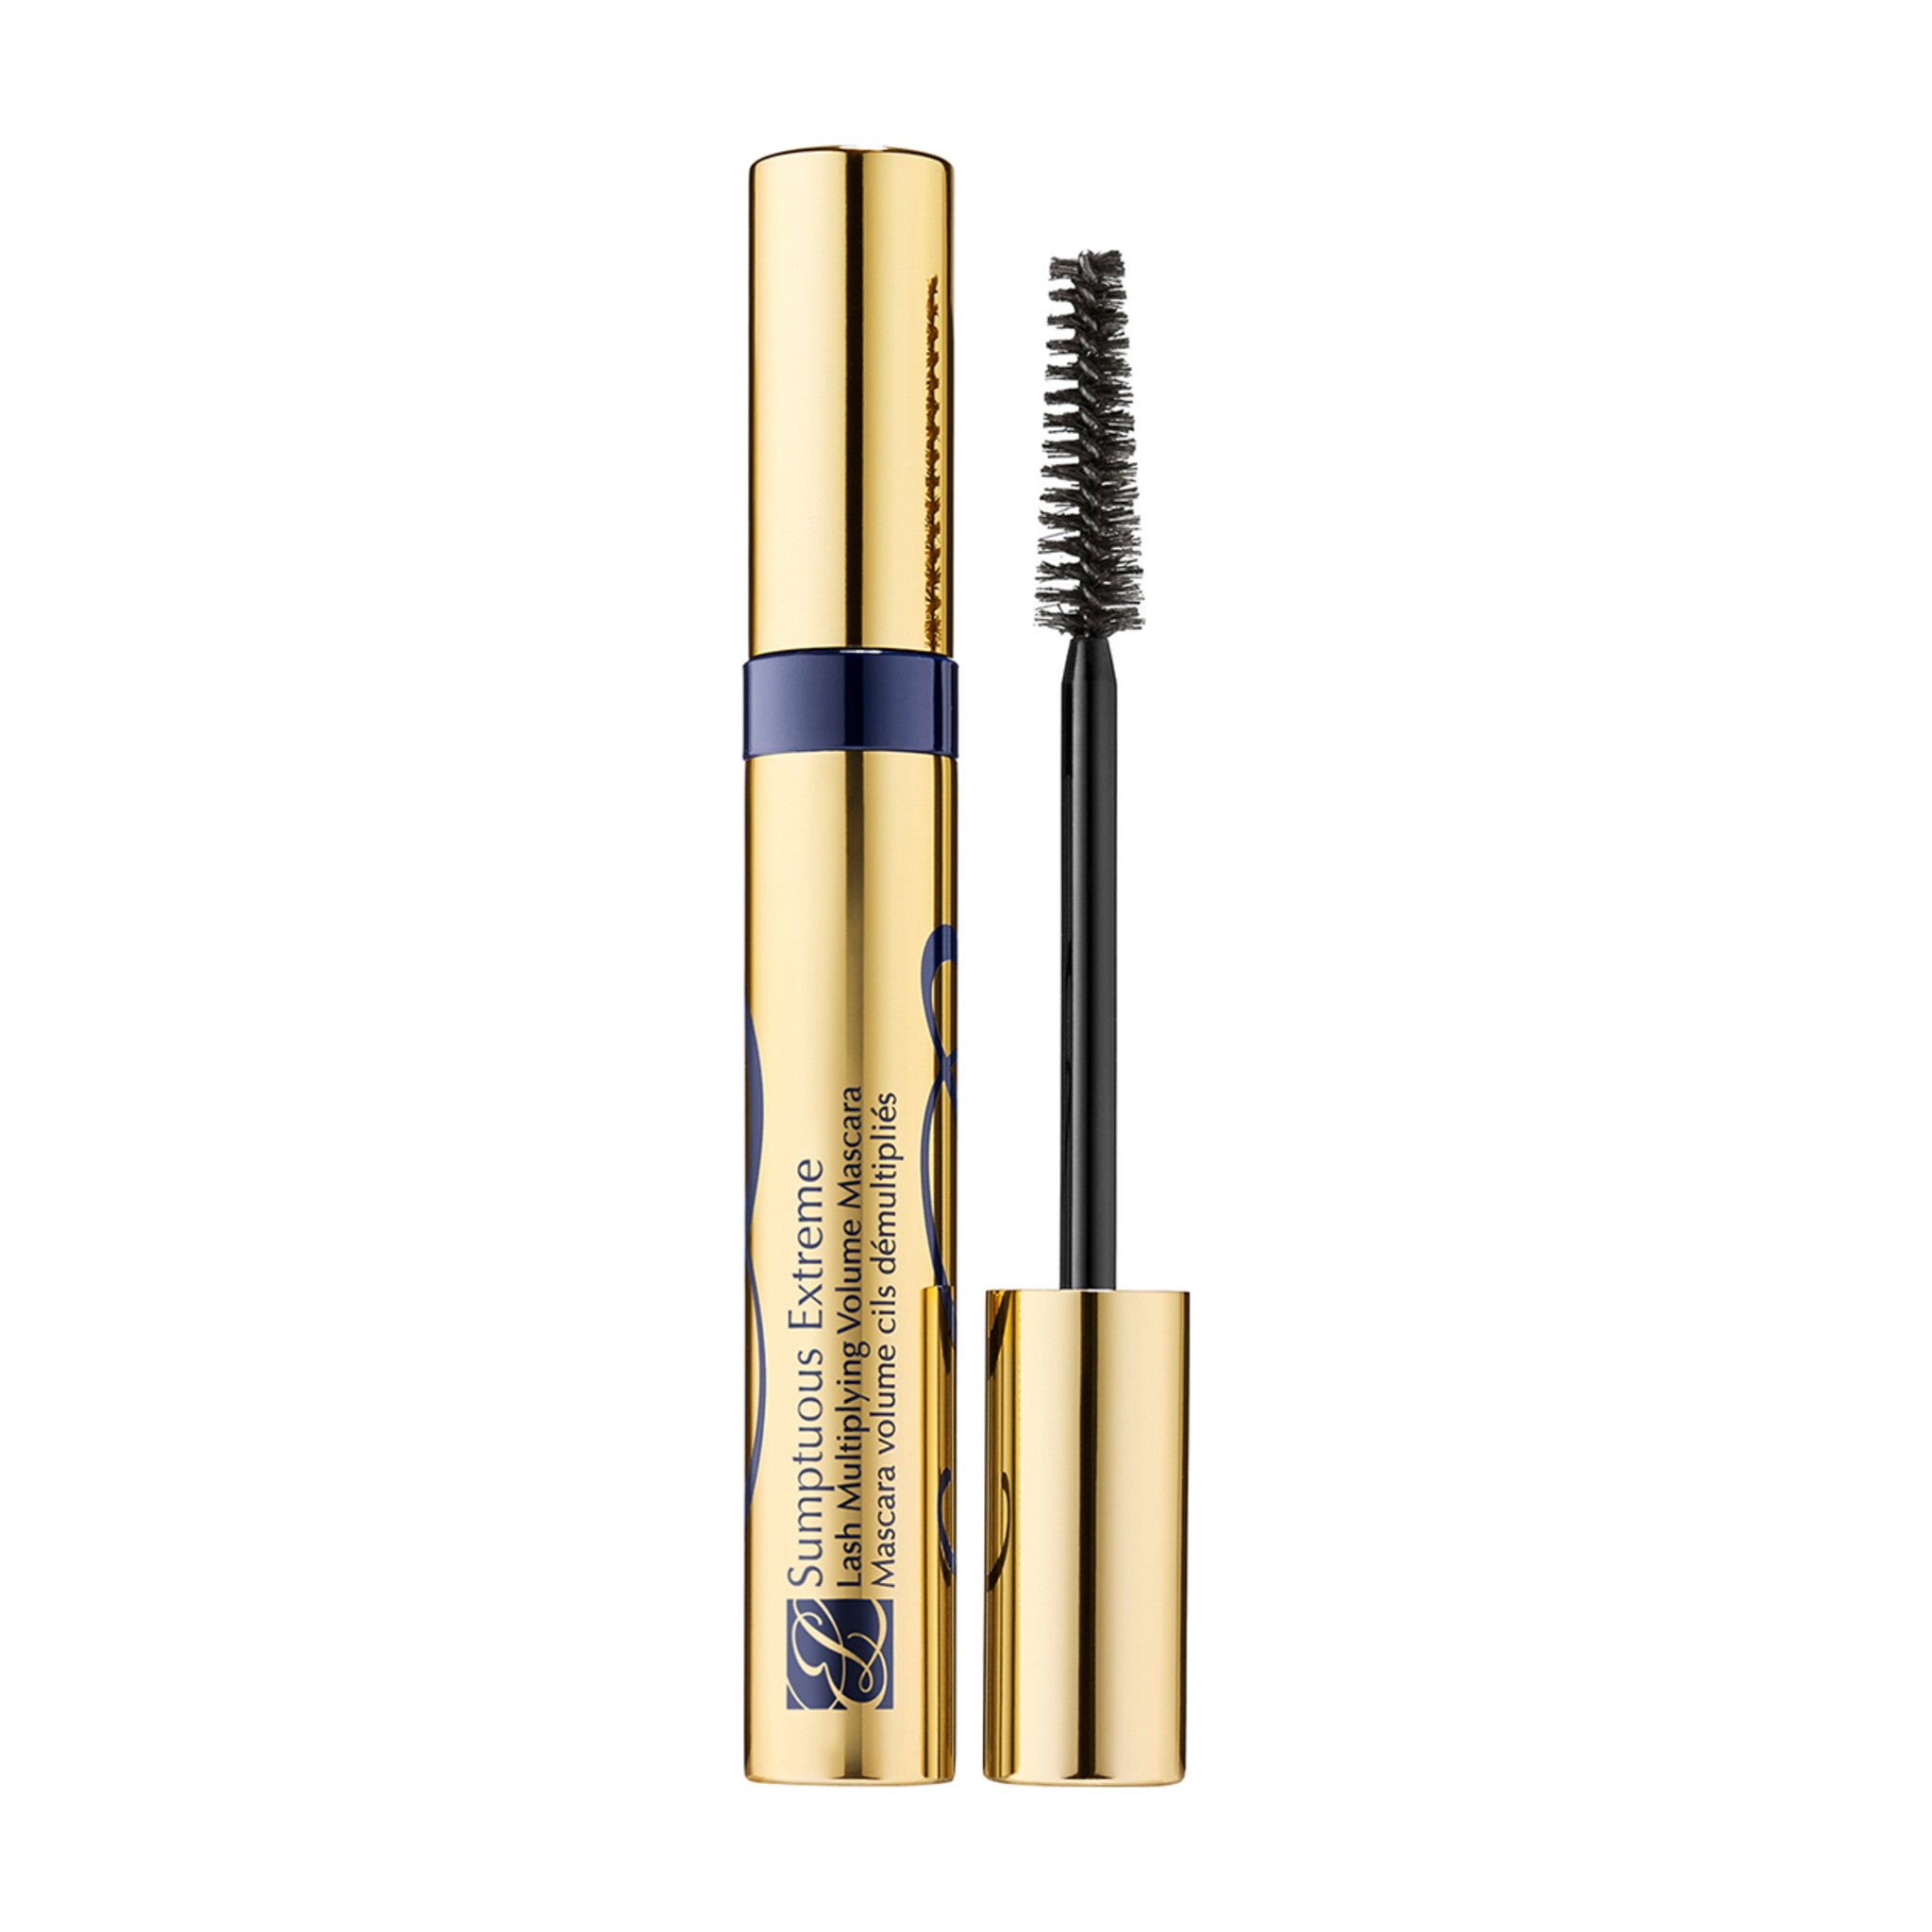 Estée Lauder Sumptuous Extreme Lash Multiplying Volume Mascara Color/Shade variant: Extreme Black. This product is in the color black